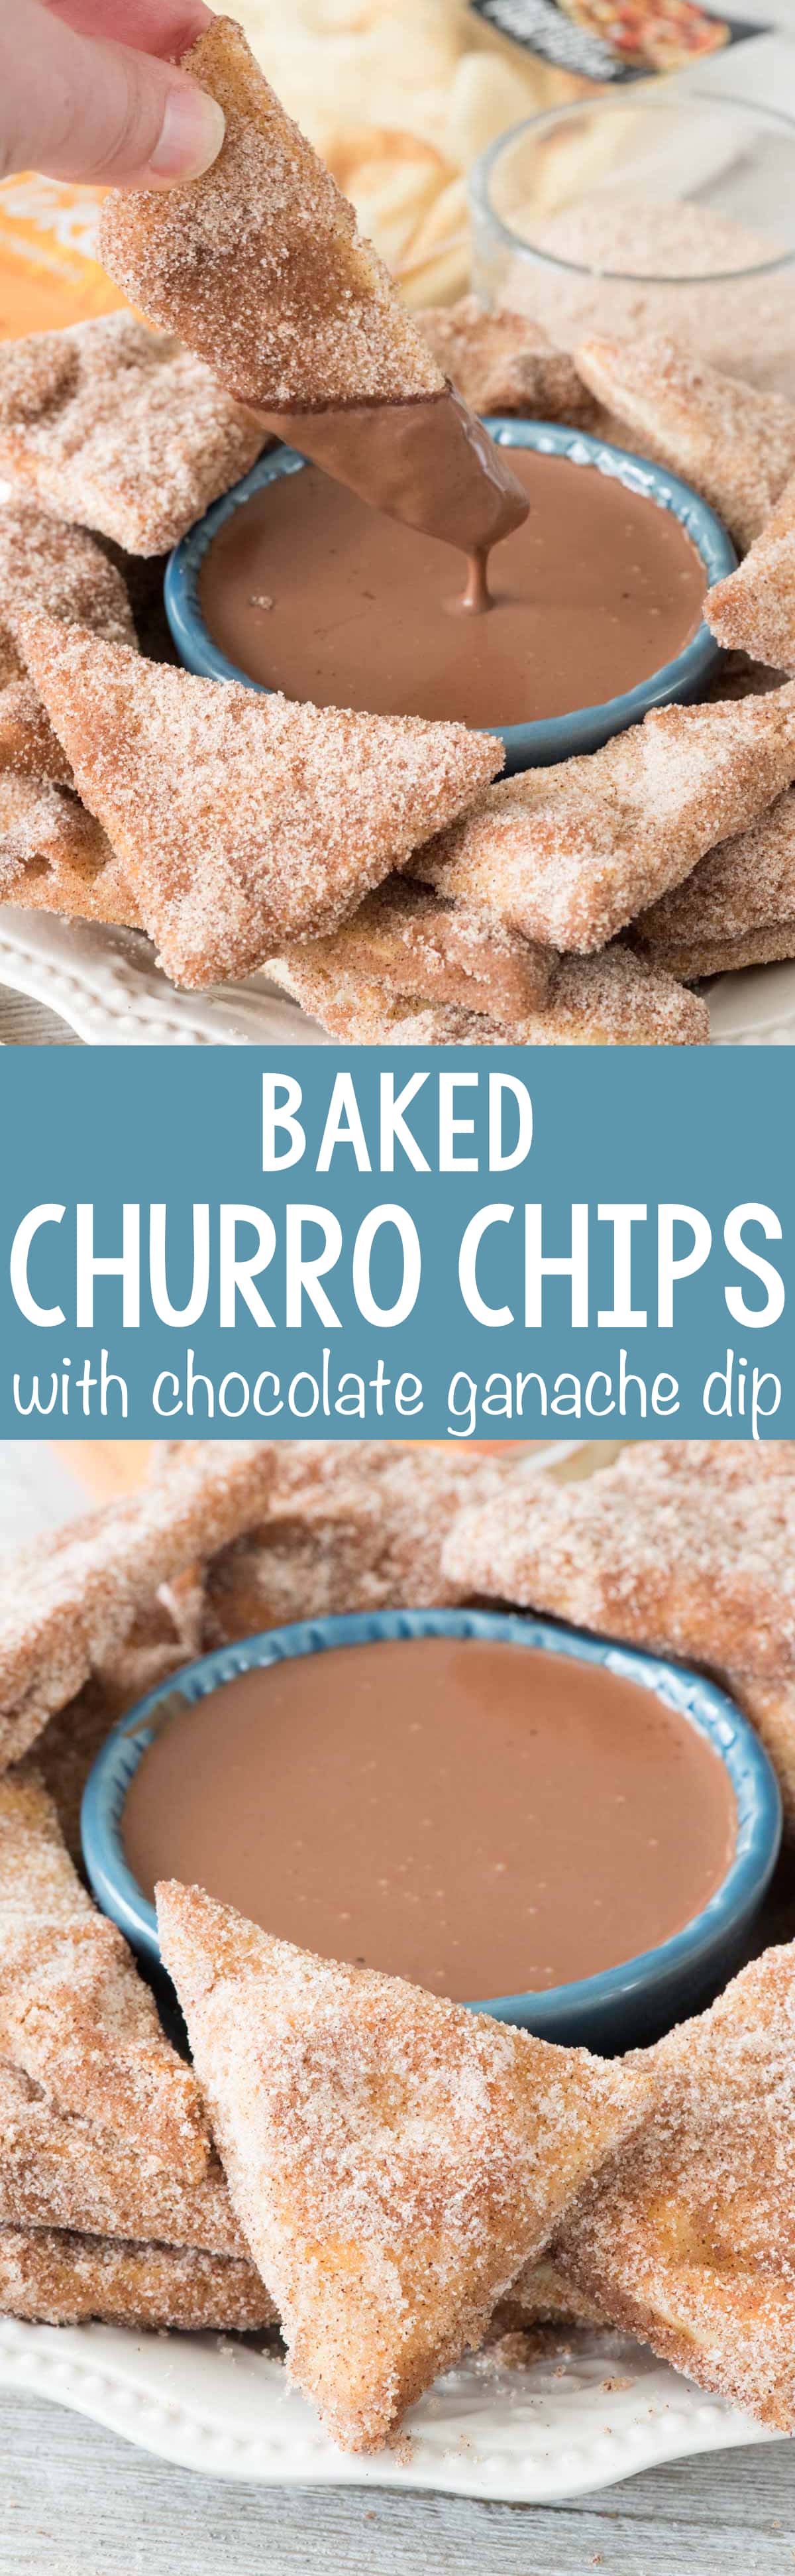 Baked Churro Chips with chocolate ganache dip - this EASY recipe starts with naan and becomes a crunchy churro chip, best dipped in rich chocolate ganache dip!